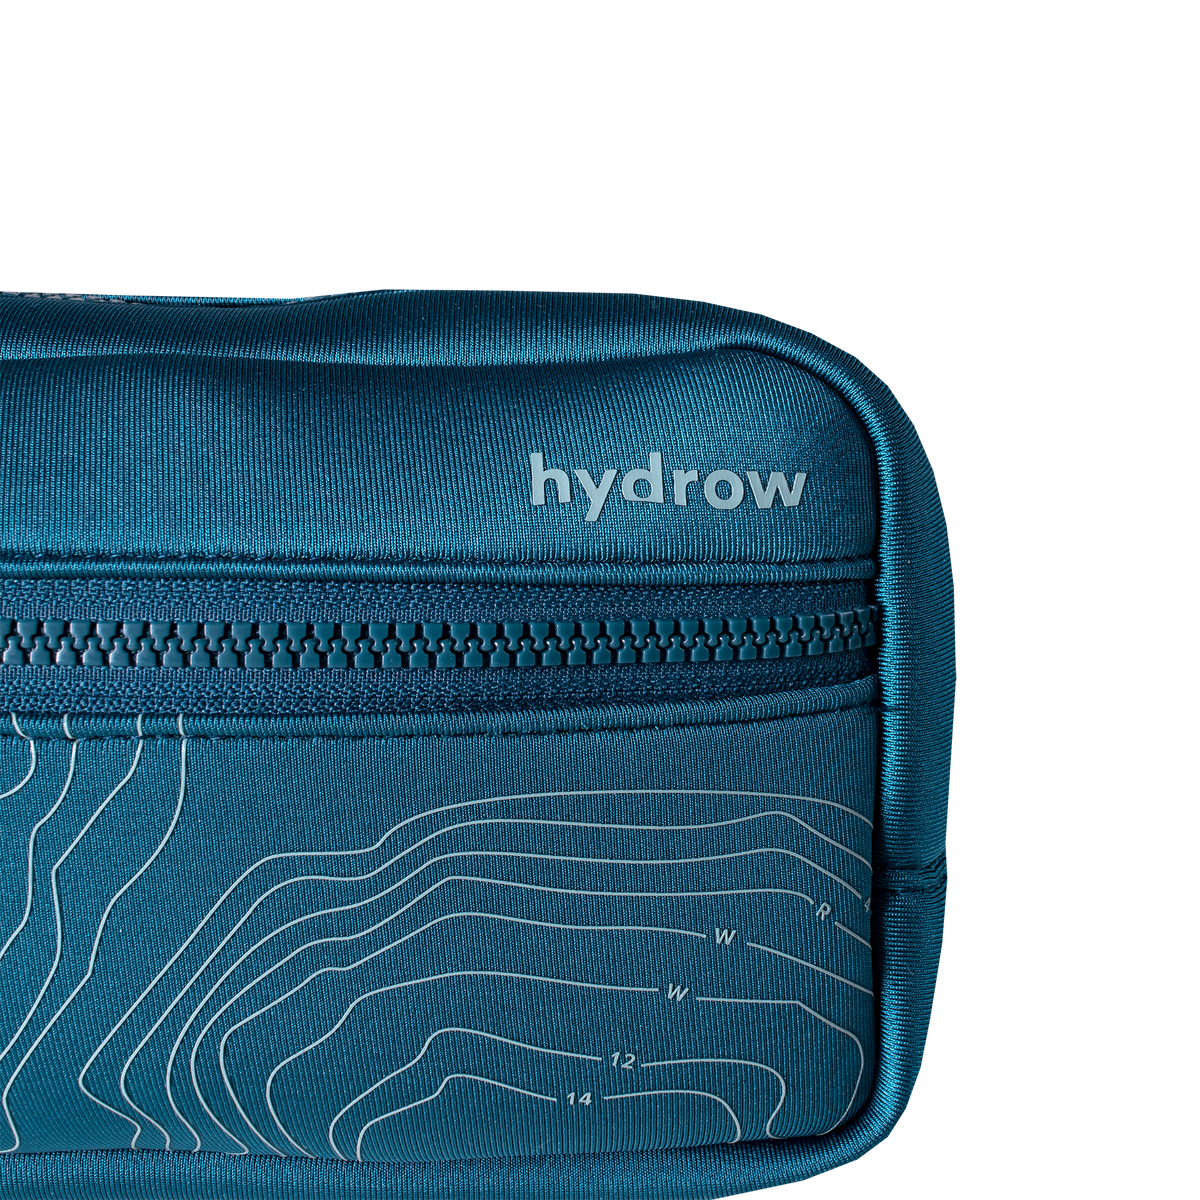 closeup of front of blue hydrow fanny pack showing zipper and hydrow logo